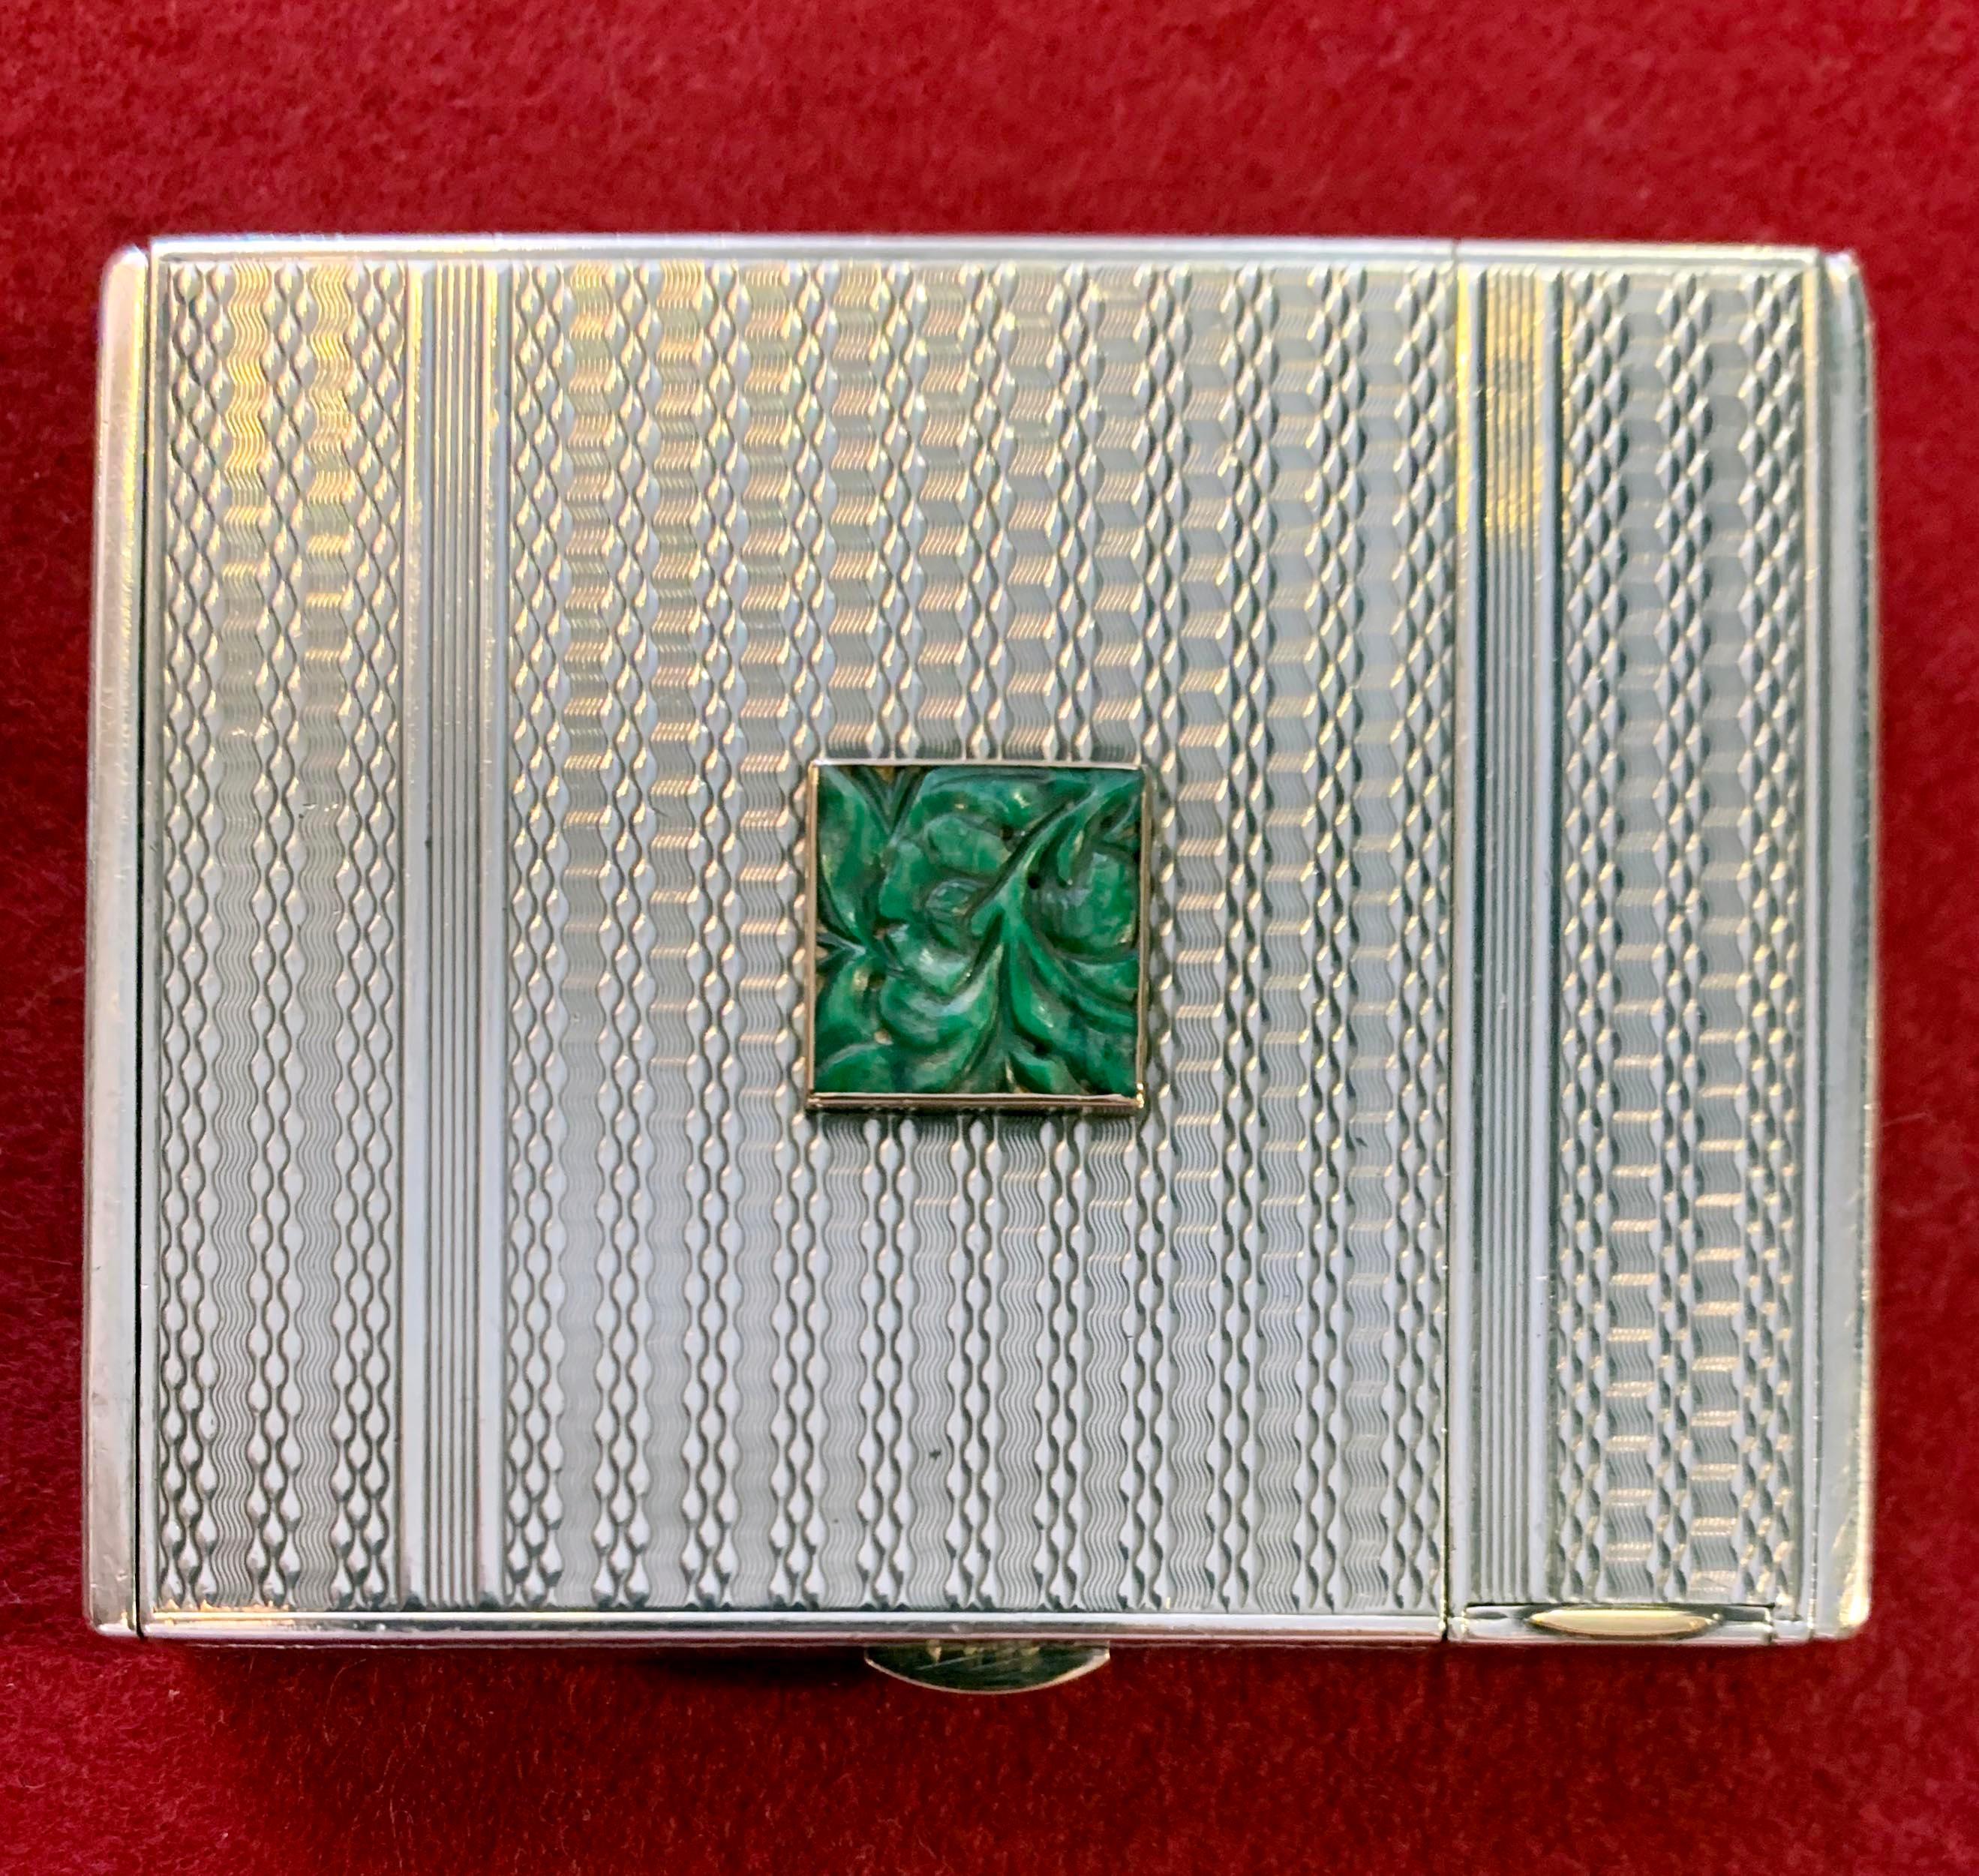 A circa 1940 French Art Deco .950 silver powder box with lipstick by Hermès. The powder box's parts are numbered 138. The box's bottom shows a serial number. The guilloché design on the silver body is decorated with a jade carved square and 18-karat